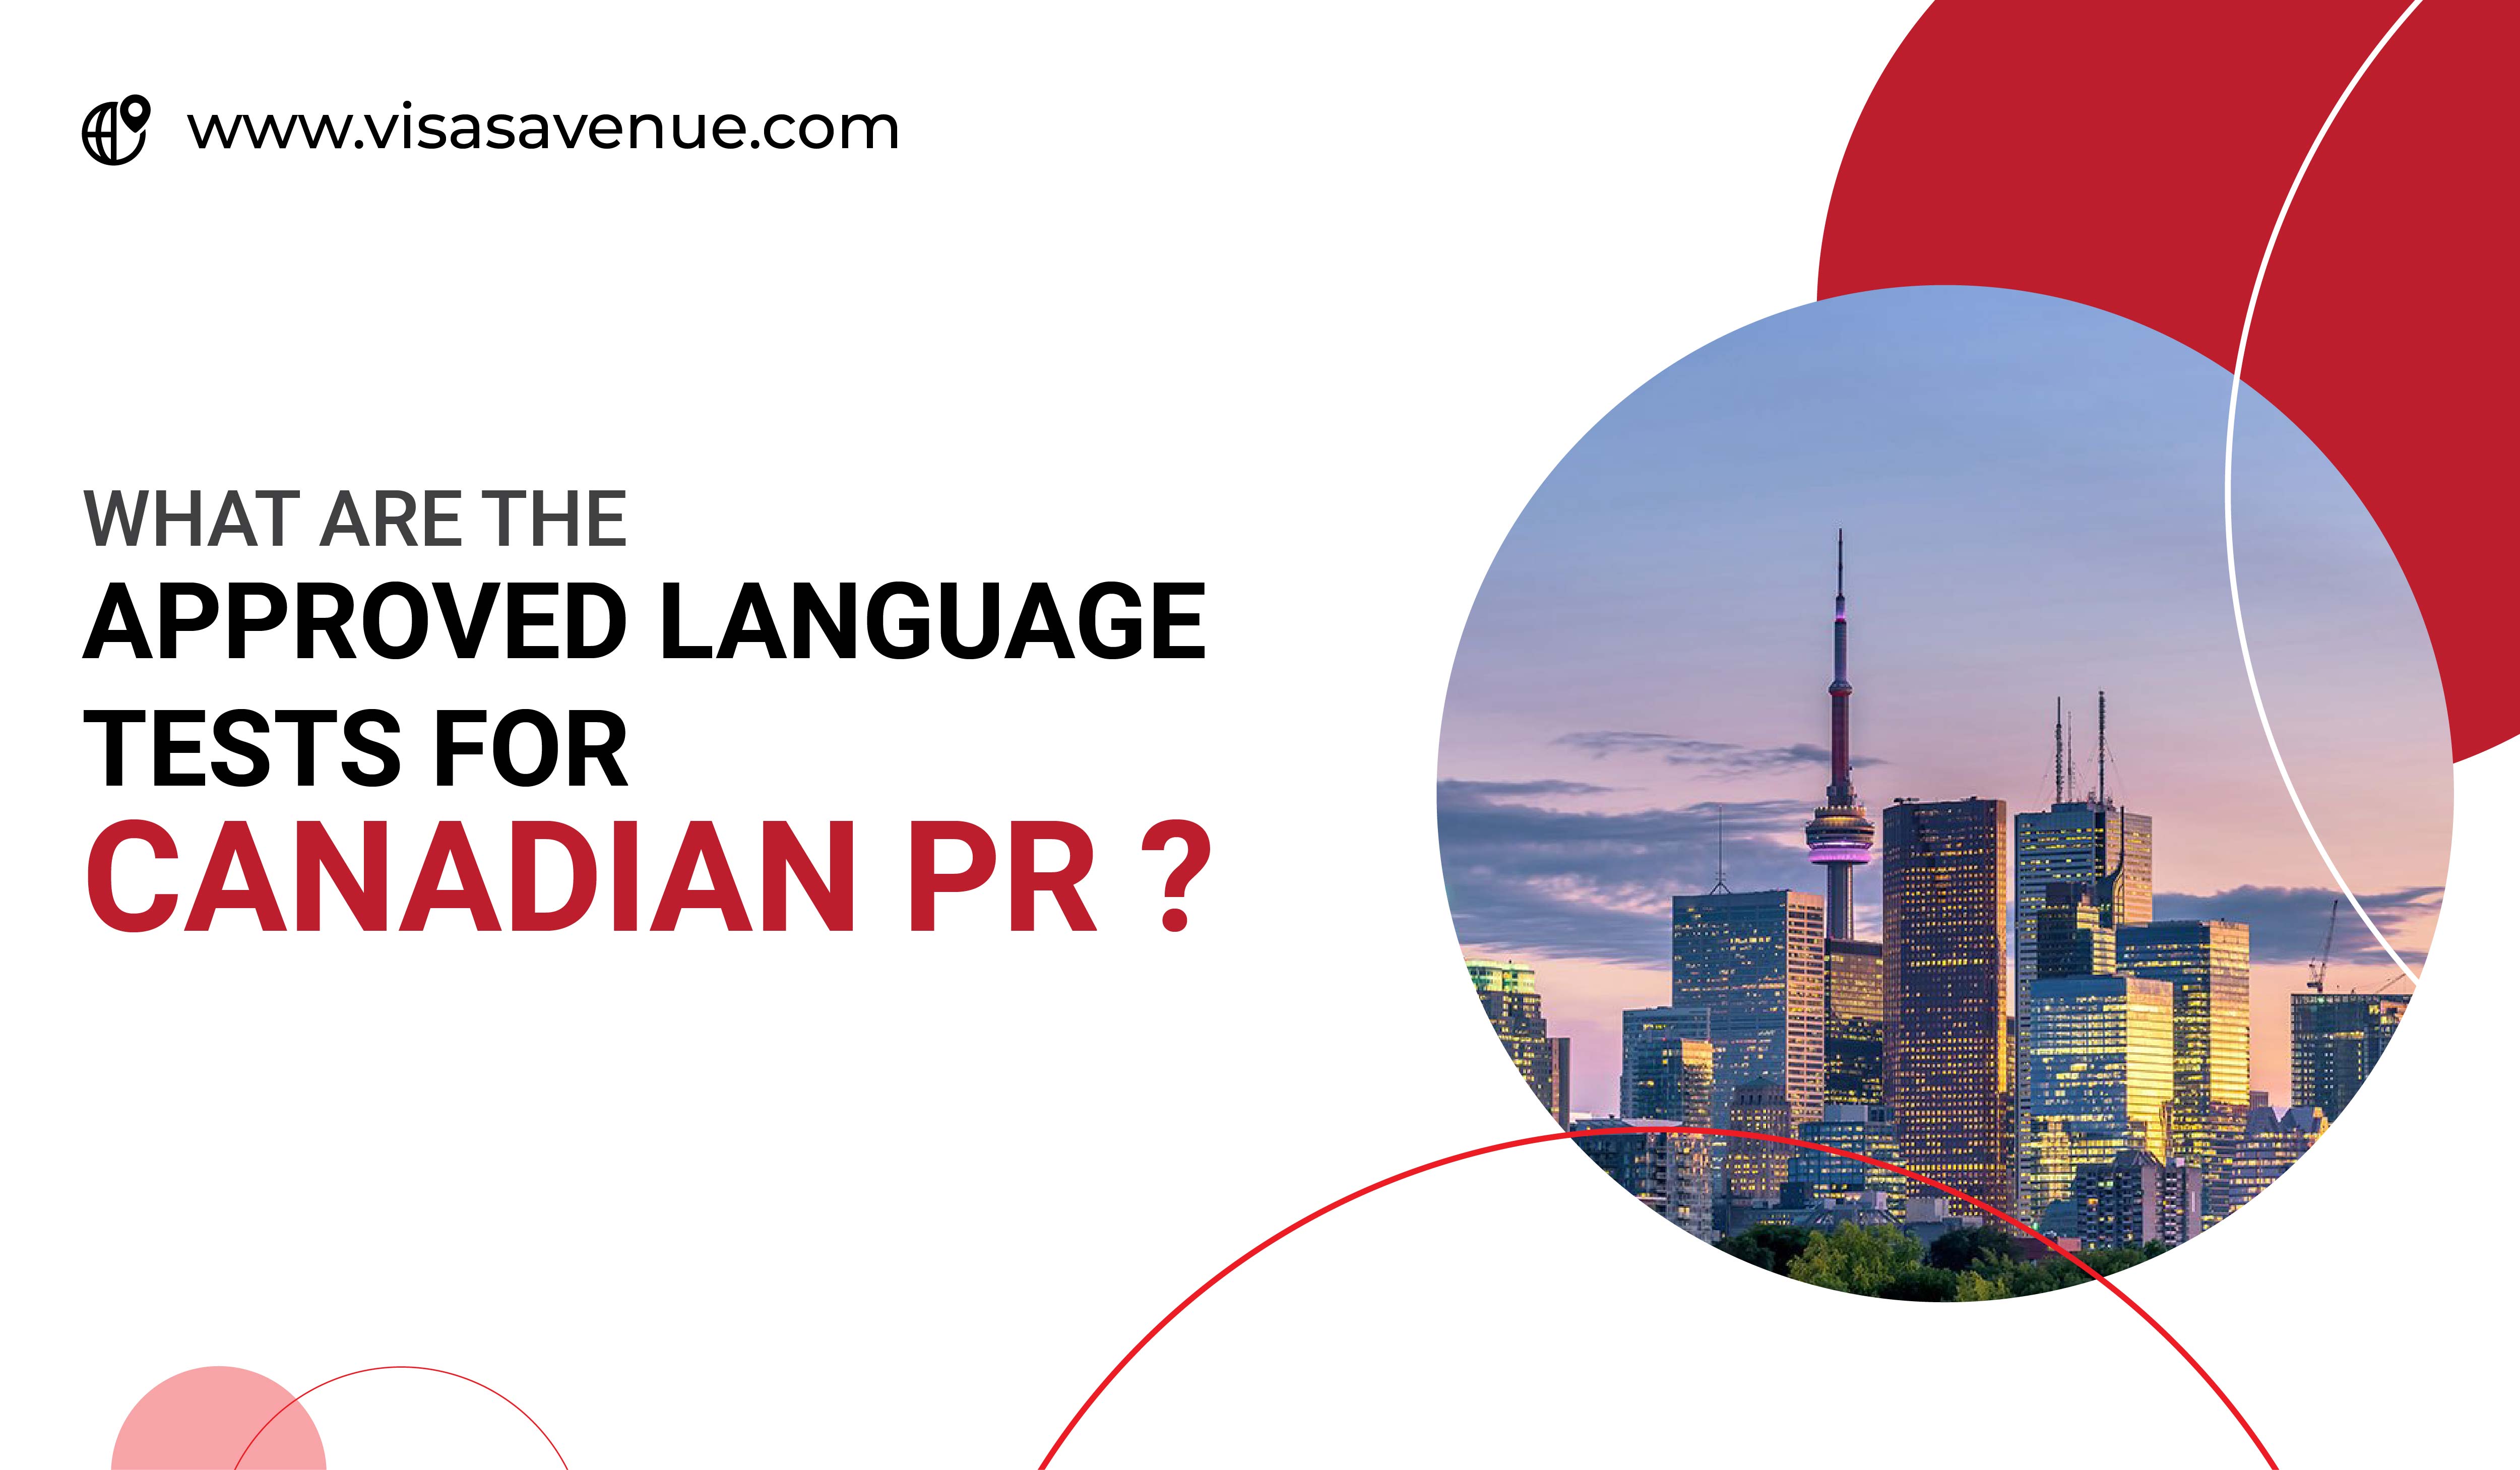 What are the Approved Language Tests for Canadian PR?